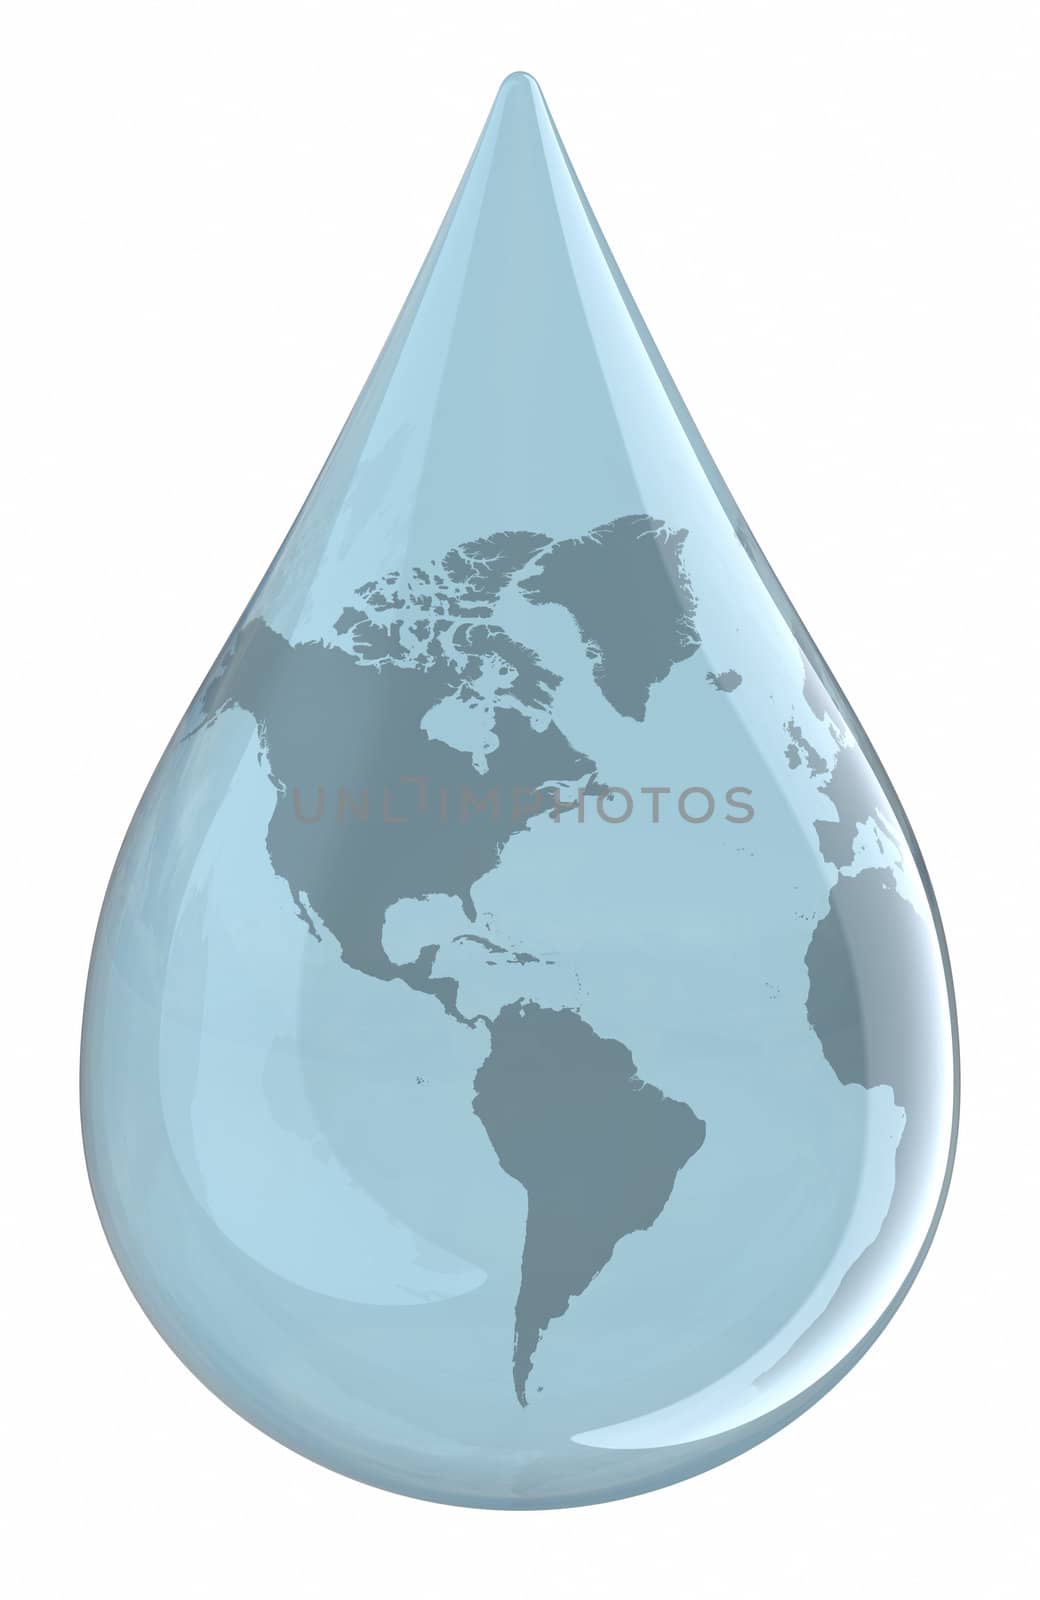 Water droplet with World Map. Clipping path included.